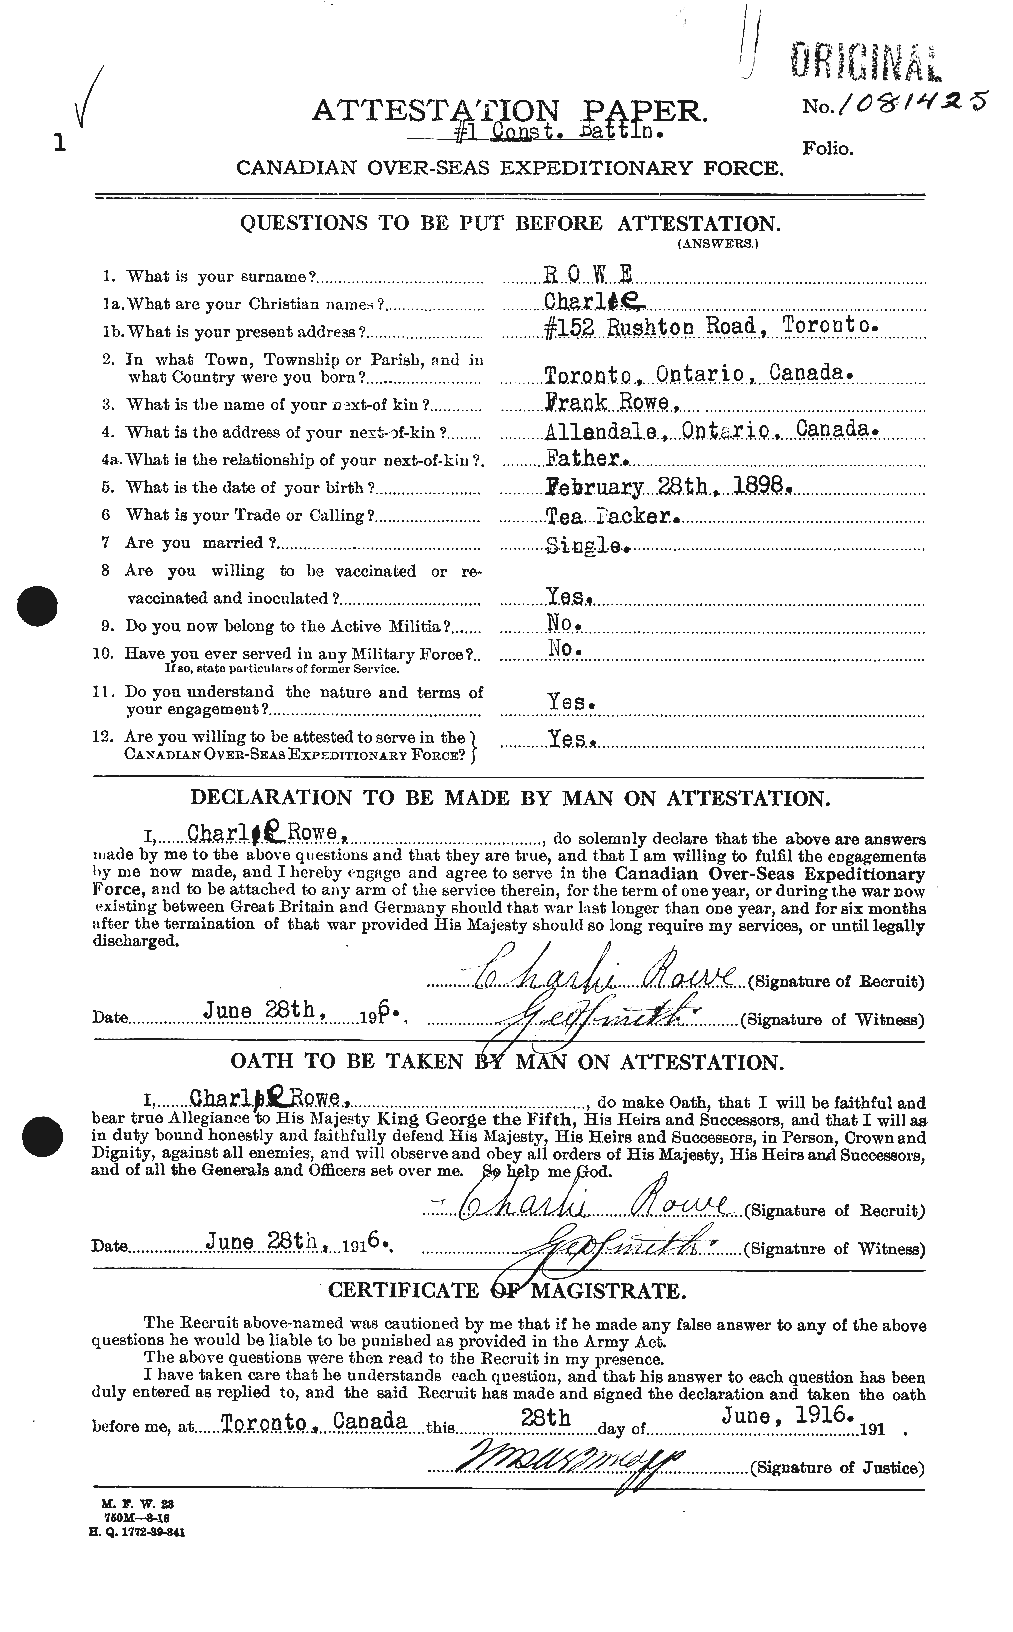 Personnel Records of the First World War - CEF 615820a